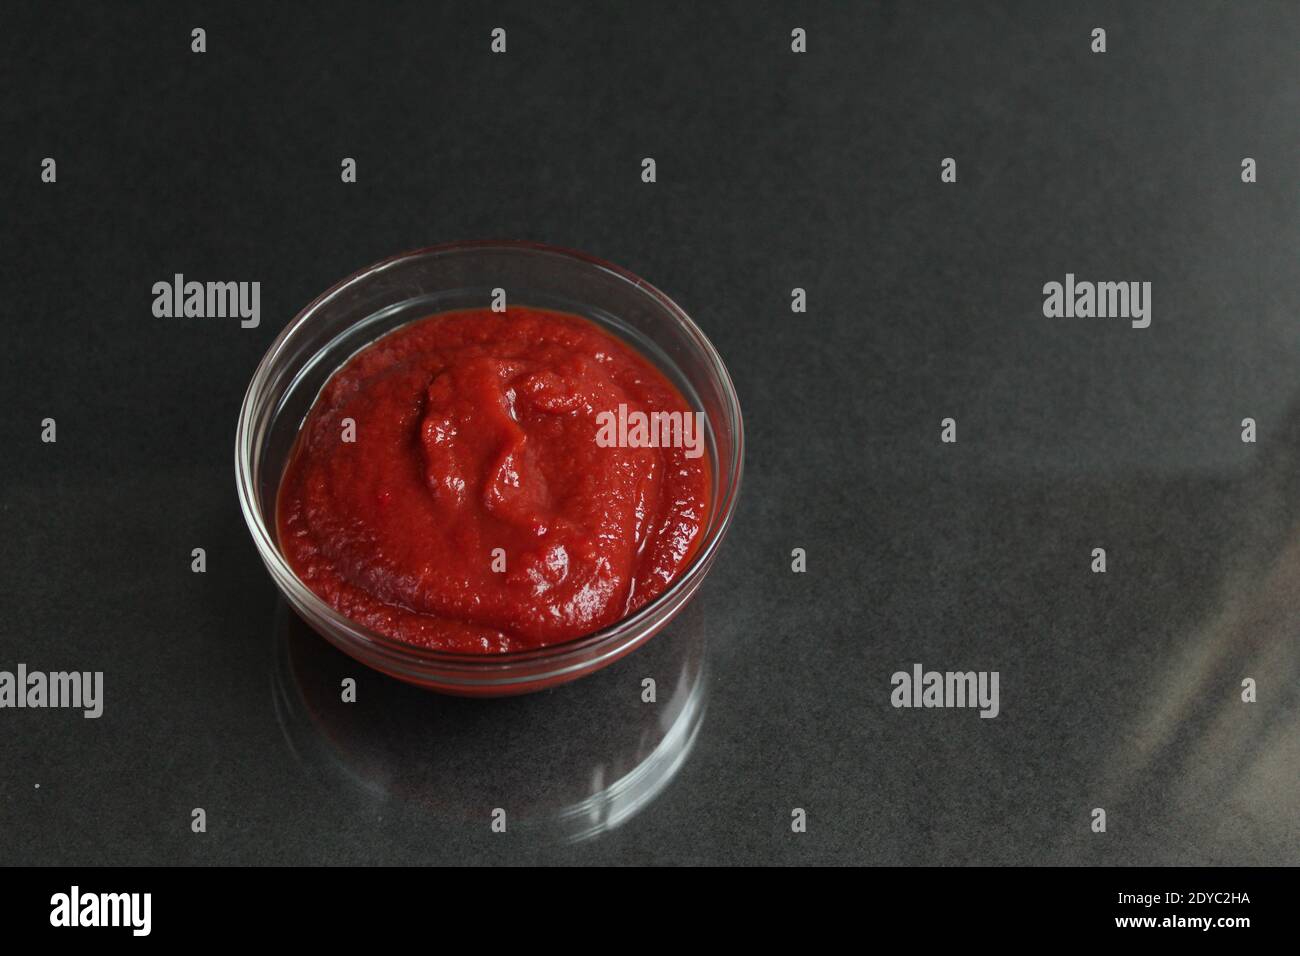 red tomato sauce paste in a glass sauce bowl on a black background copy space place for text. Stock Photo